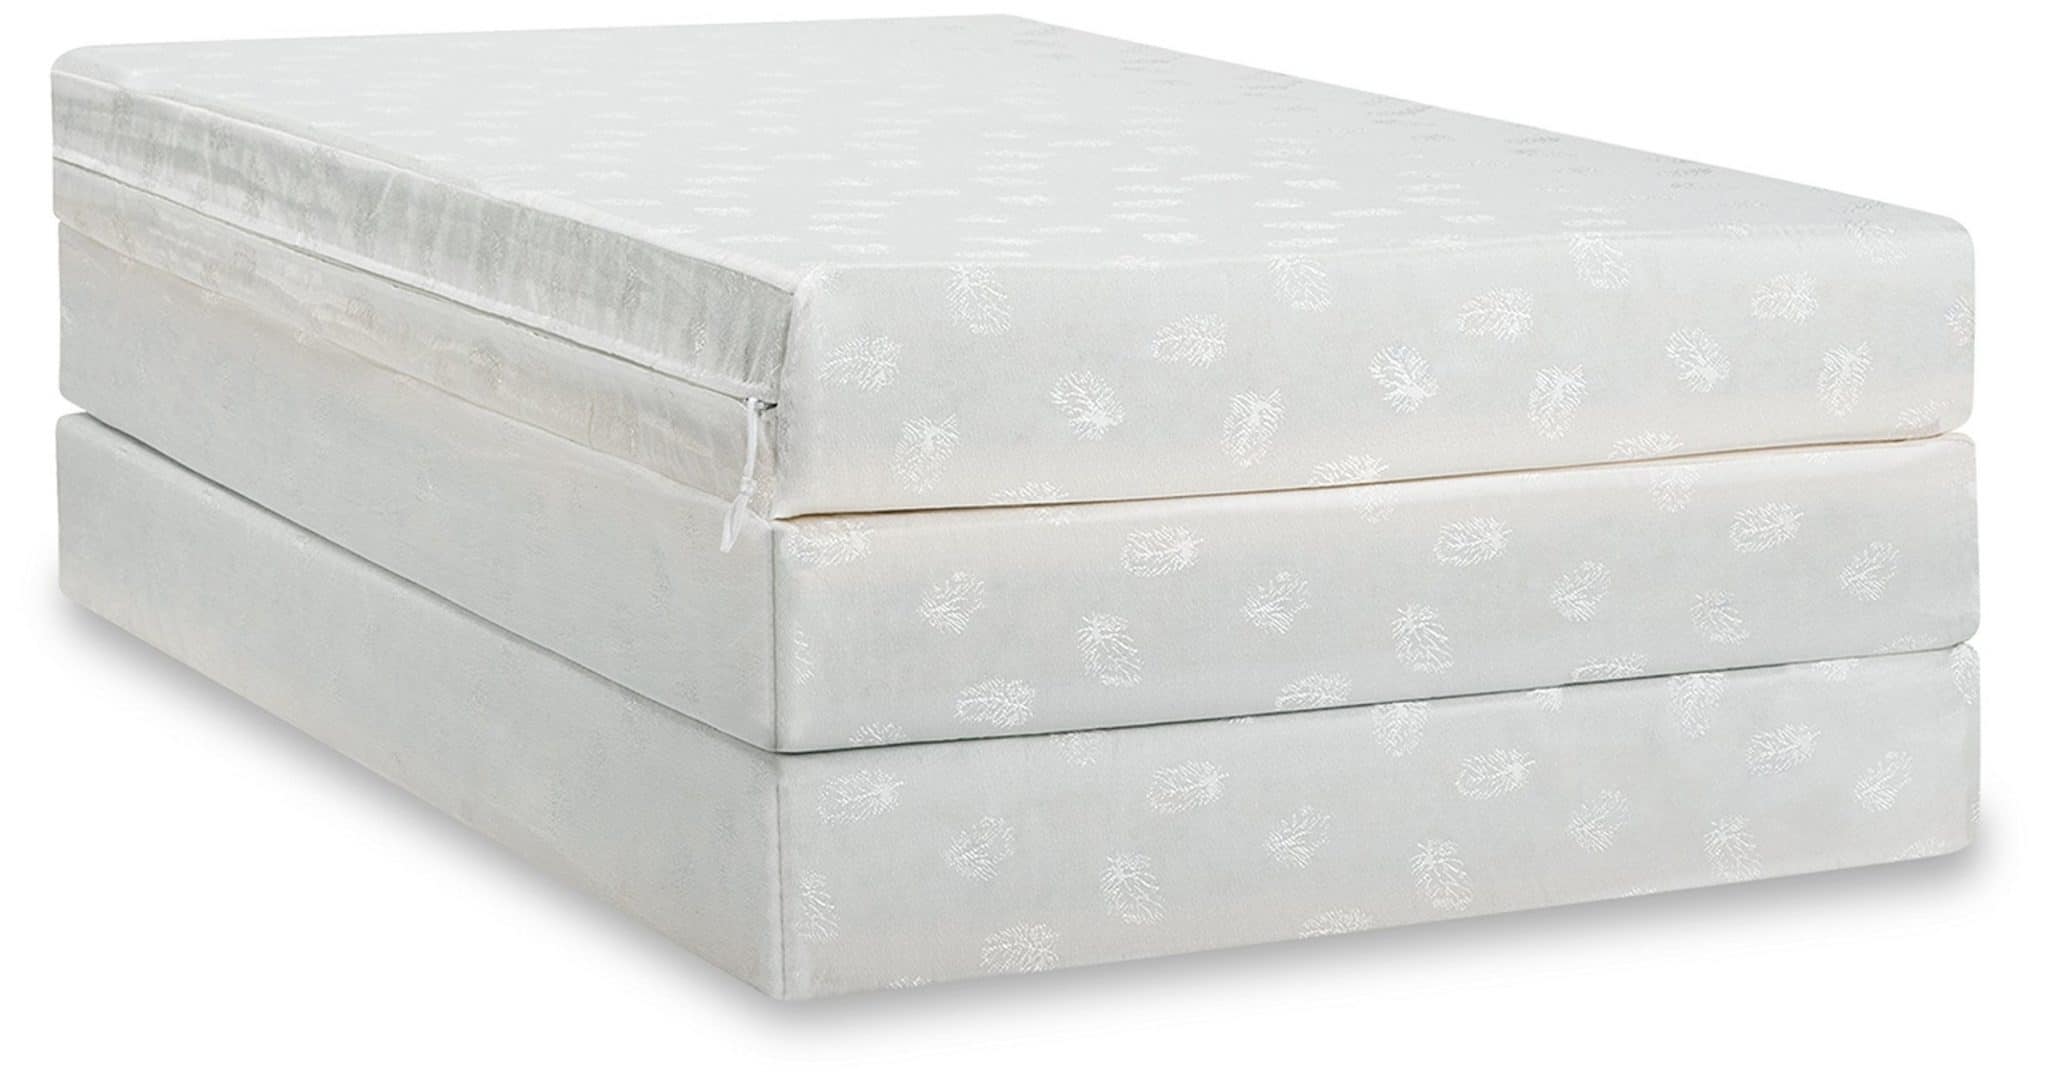 cant fold mattress cover